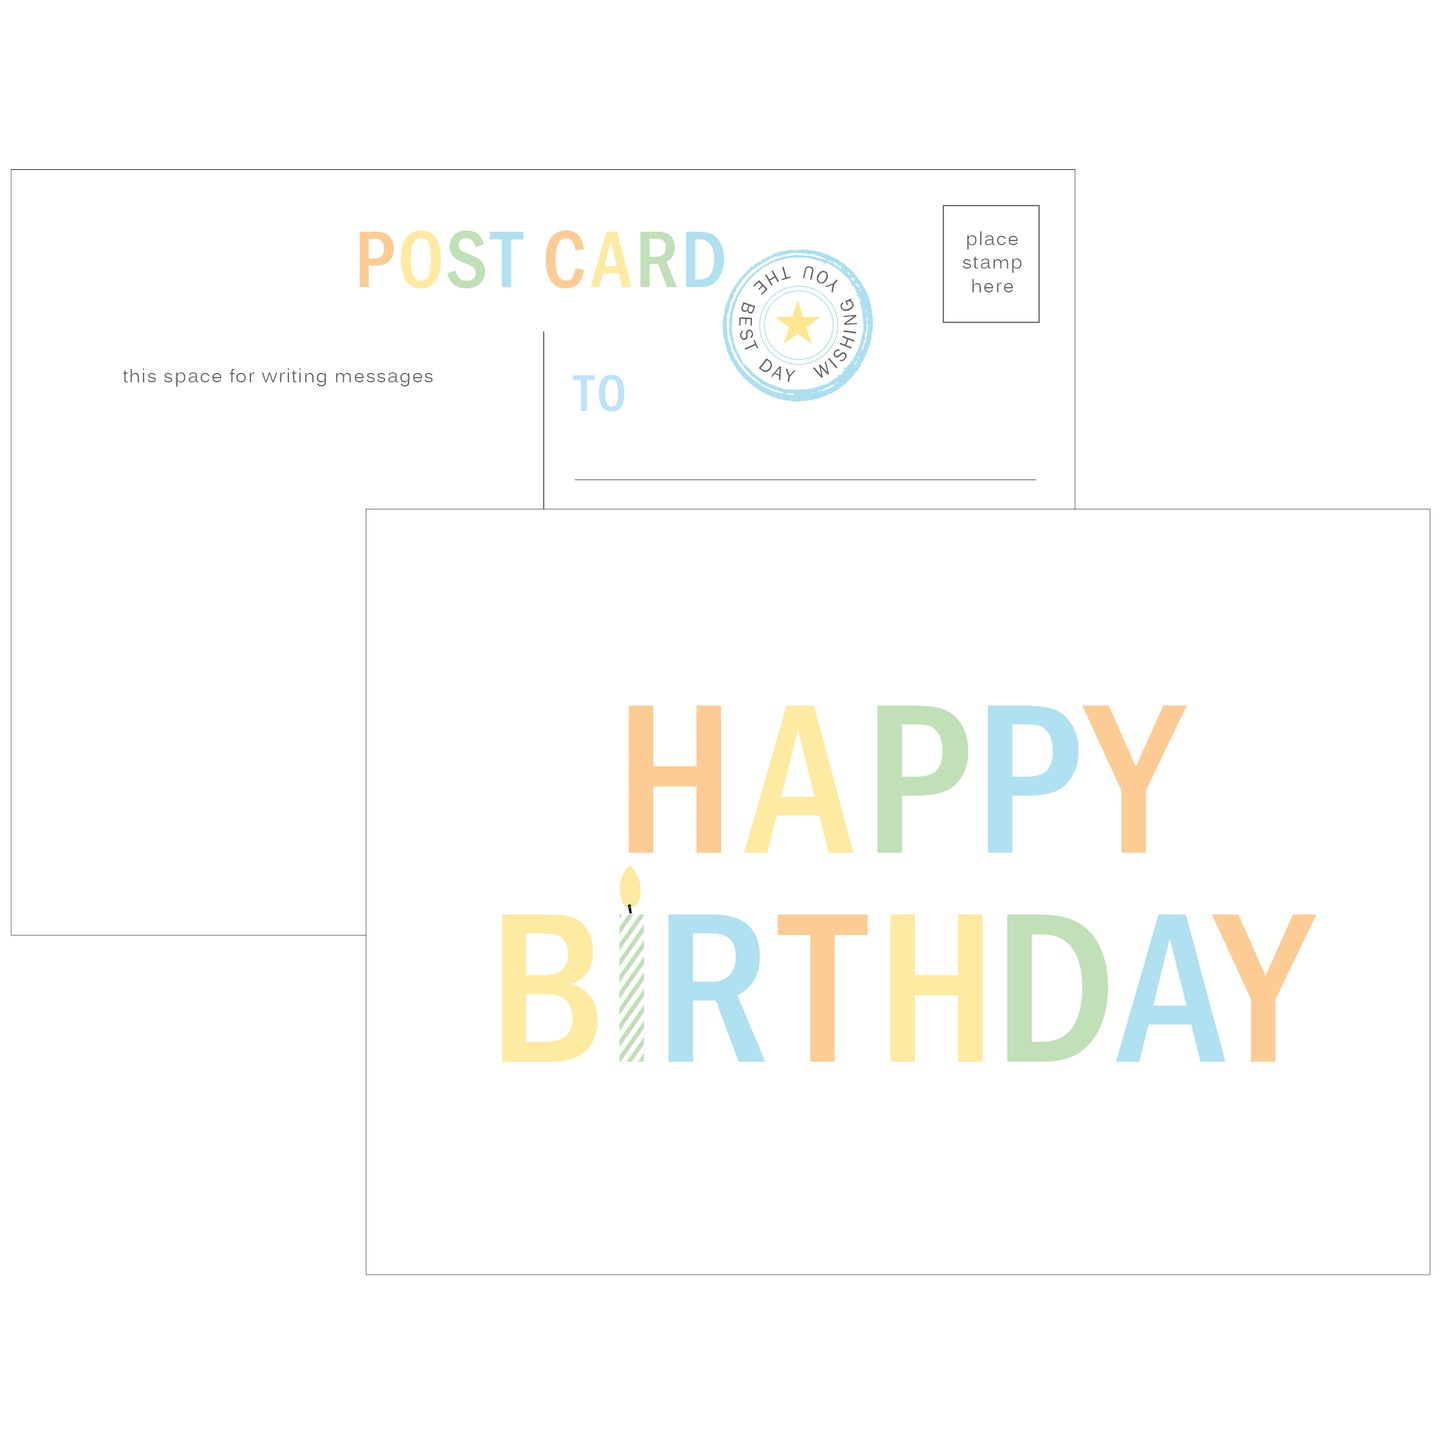 Happy Birthday Candle Postcards - Pack of 10